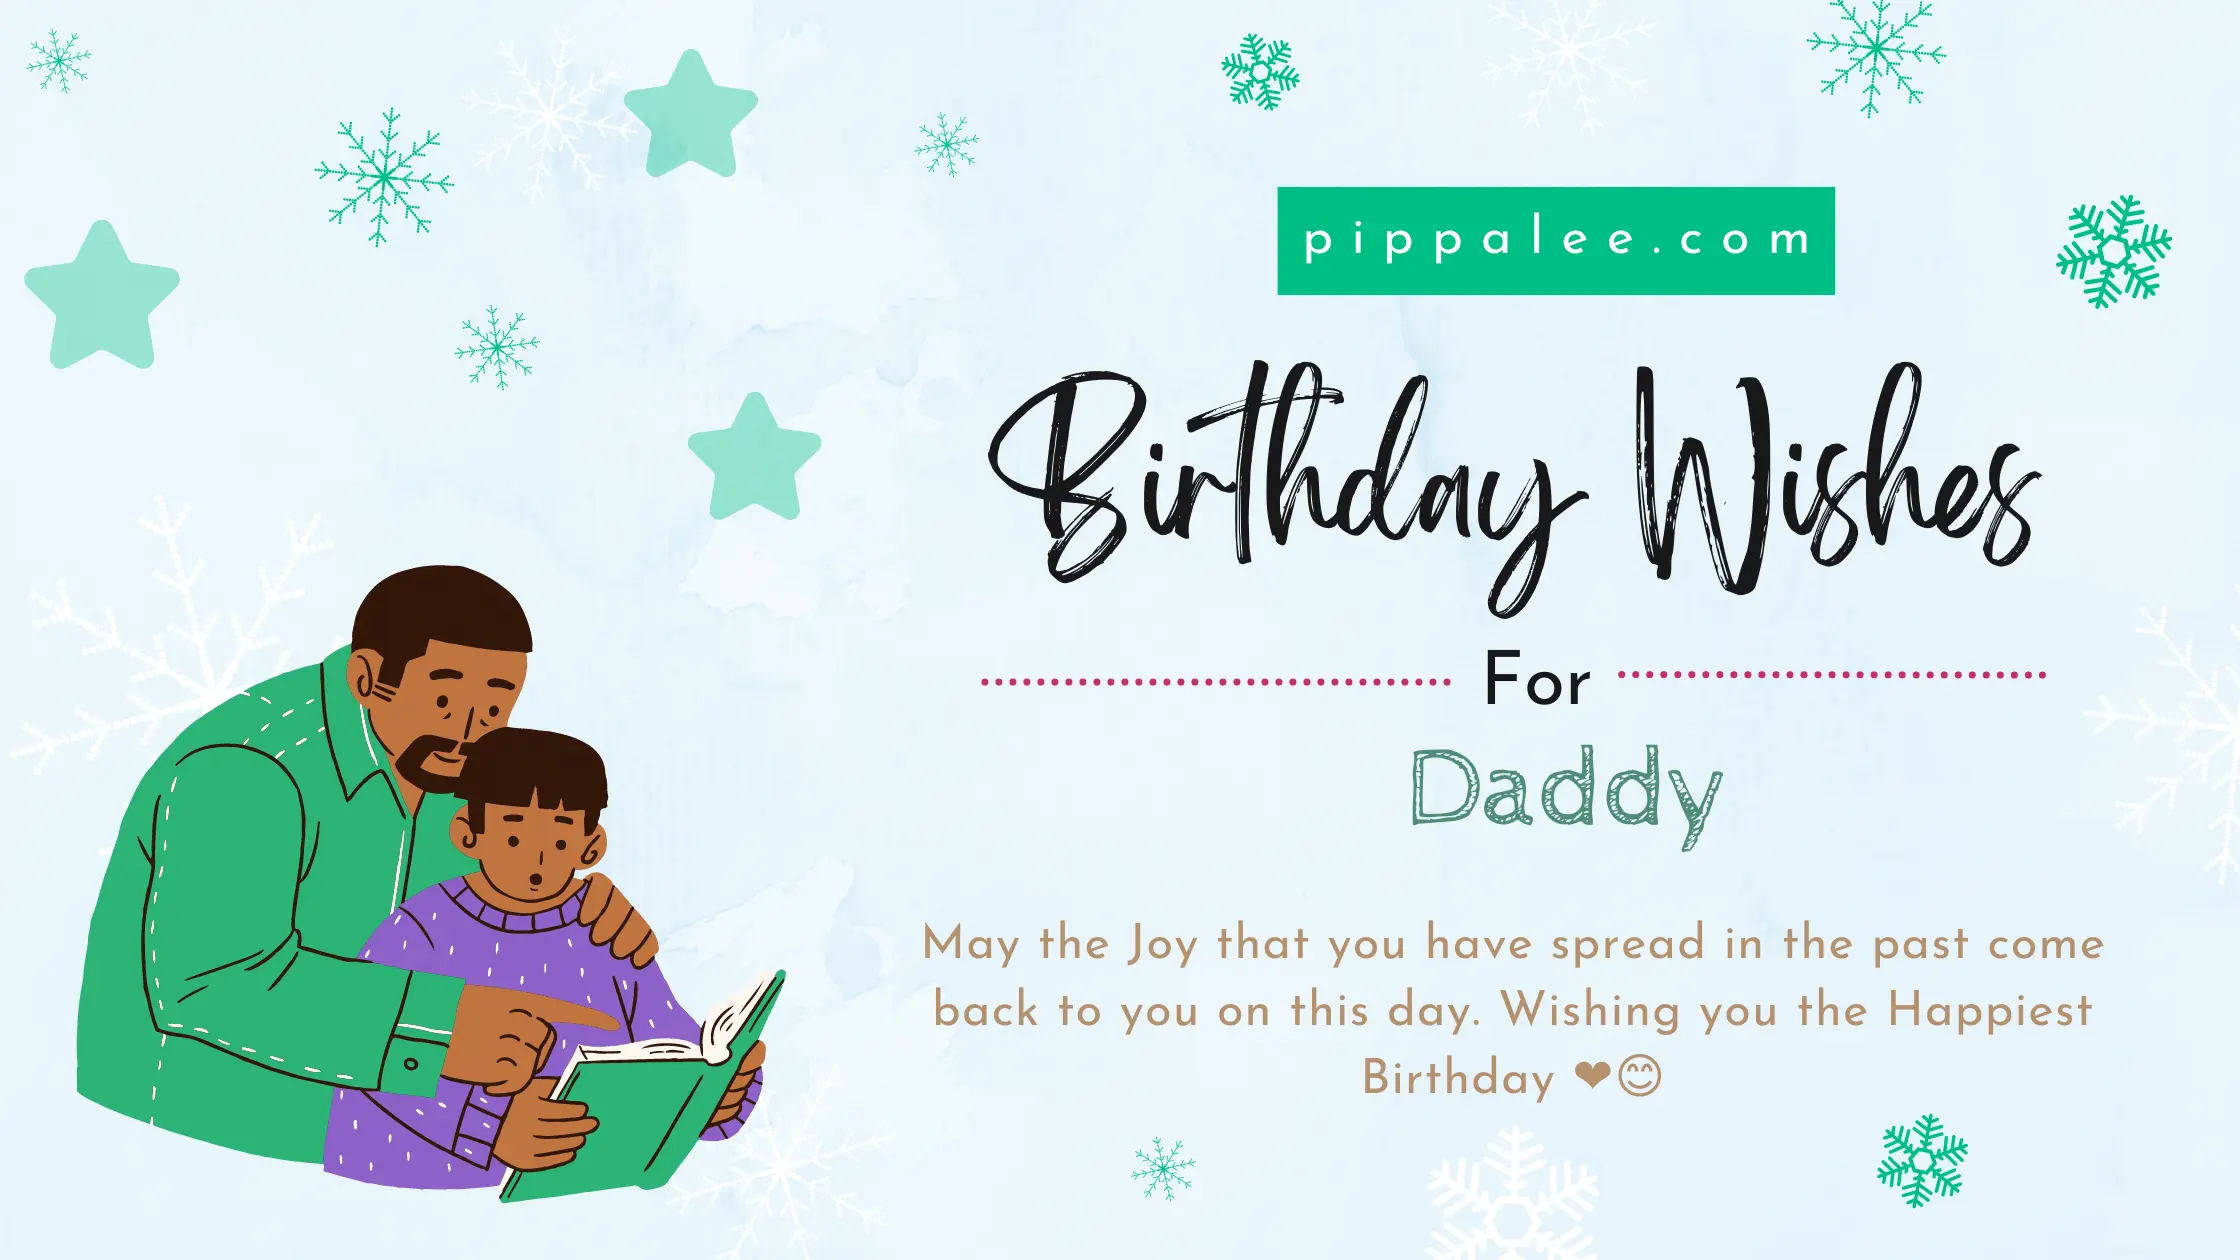 Birthday Wishes For Daddy - Wishes & Messages